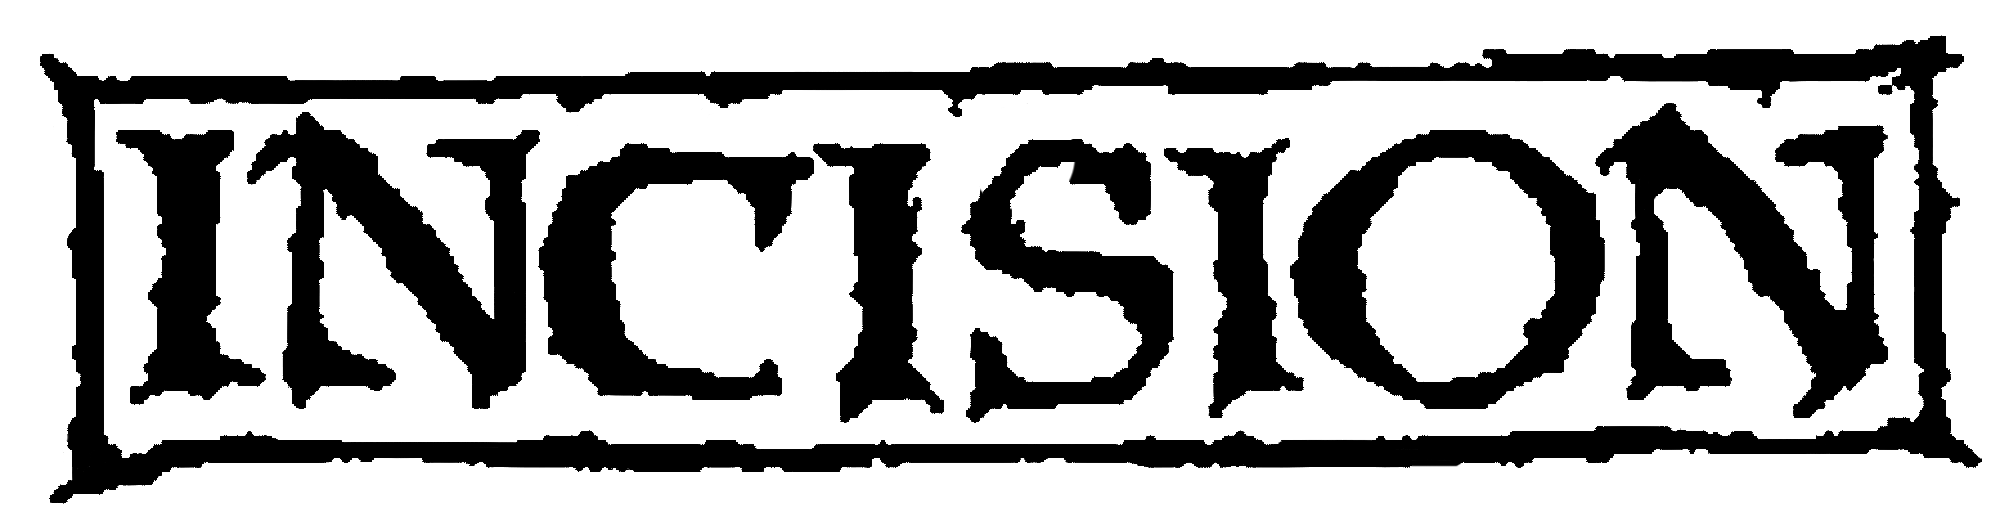 The second Incision logo, used from May to September of 1993.